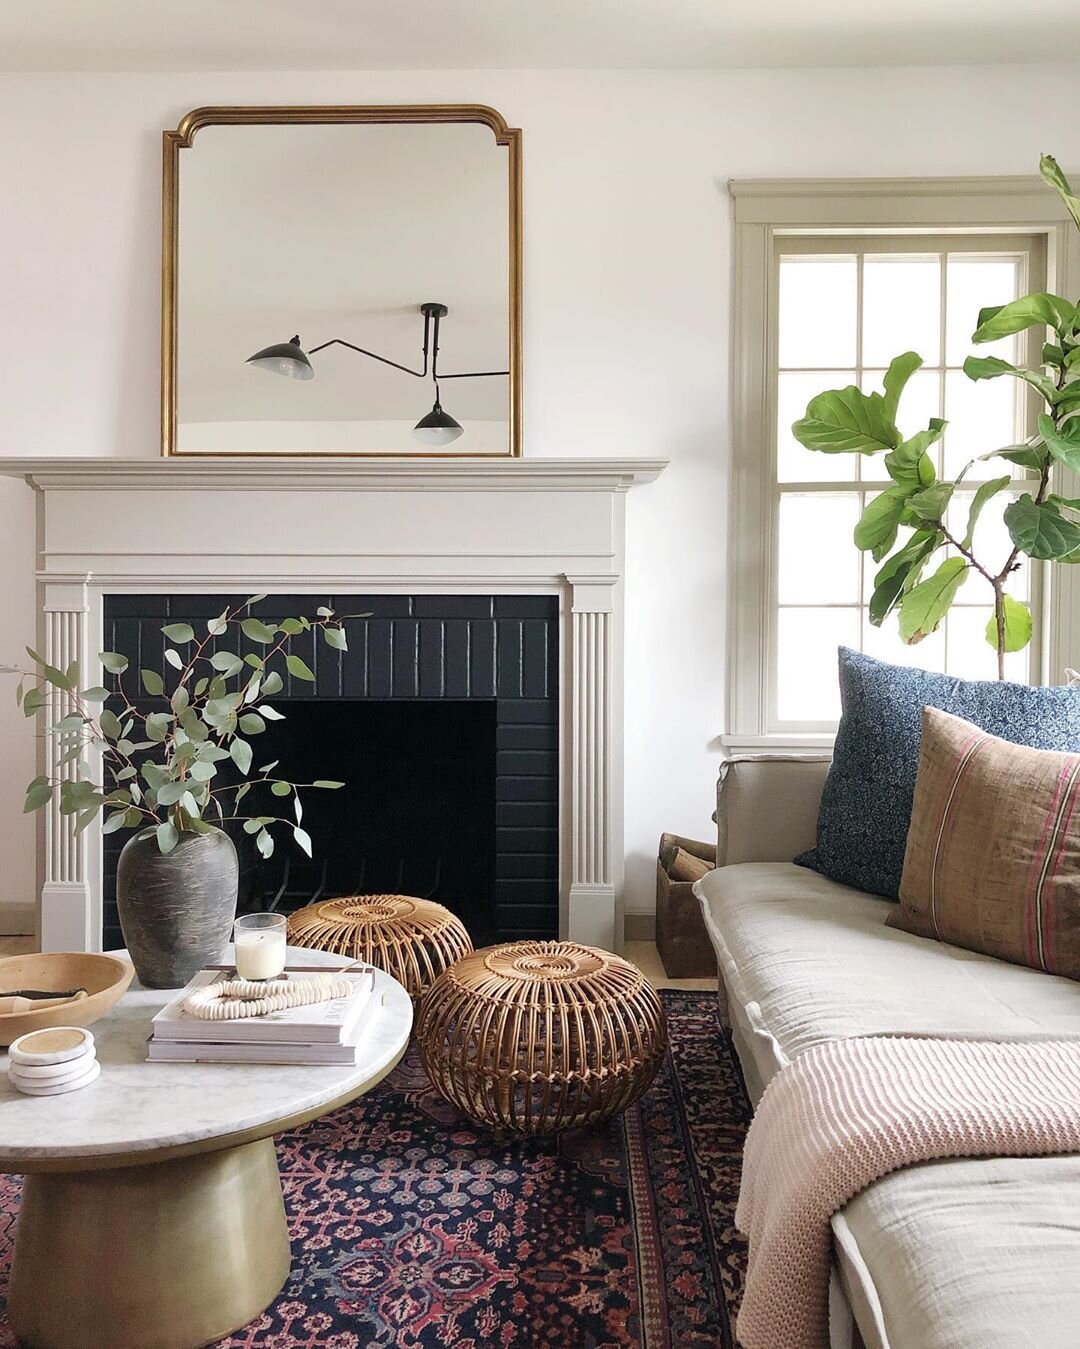 Window, door, and floor trim q+a | Nadine Stay | Should you paint your trim the same white as your walls? What sheen should you paint your walls and trim? Paint and trim sheen tips. Contrast trim inspiration. (Image from @carpendaughter)